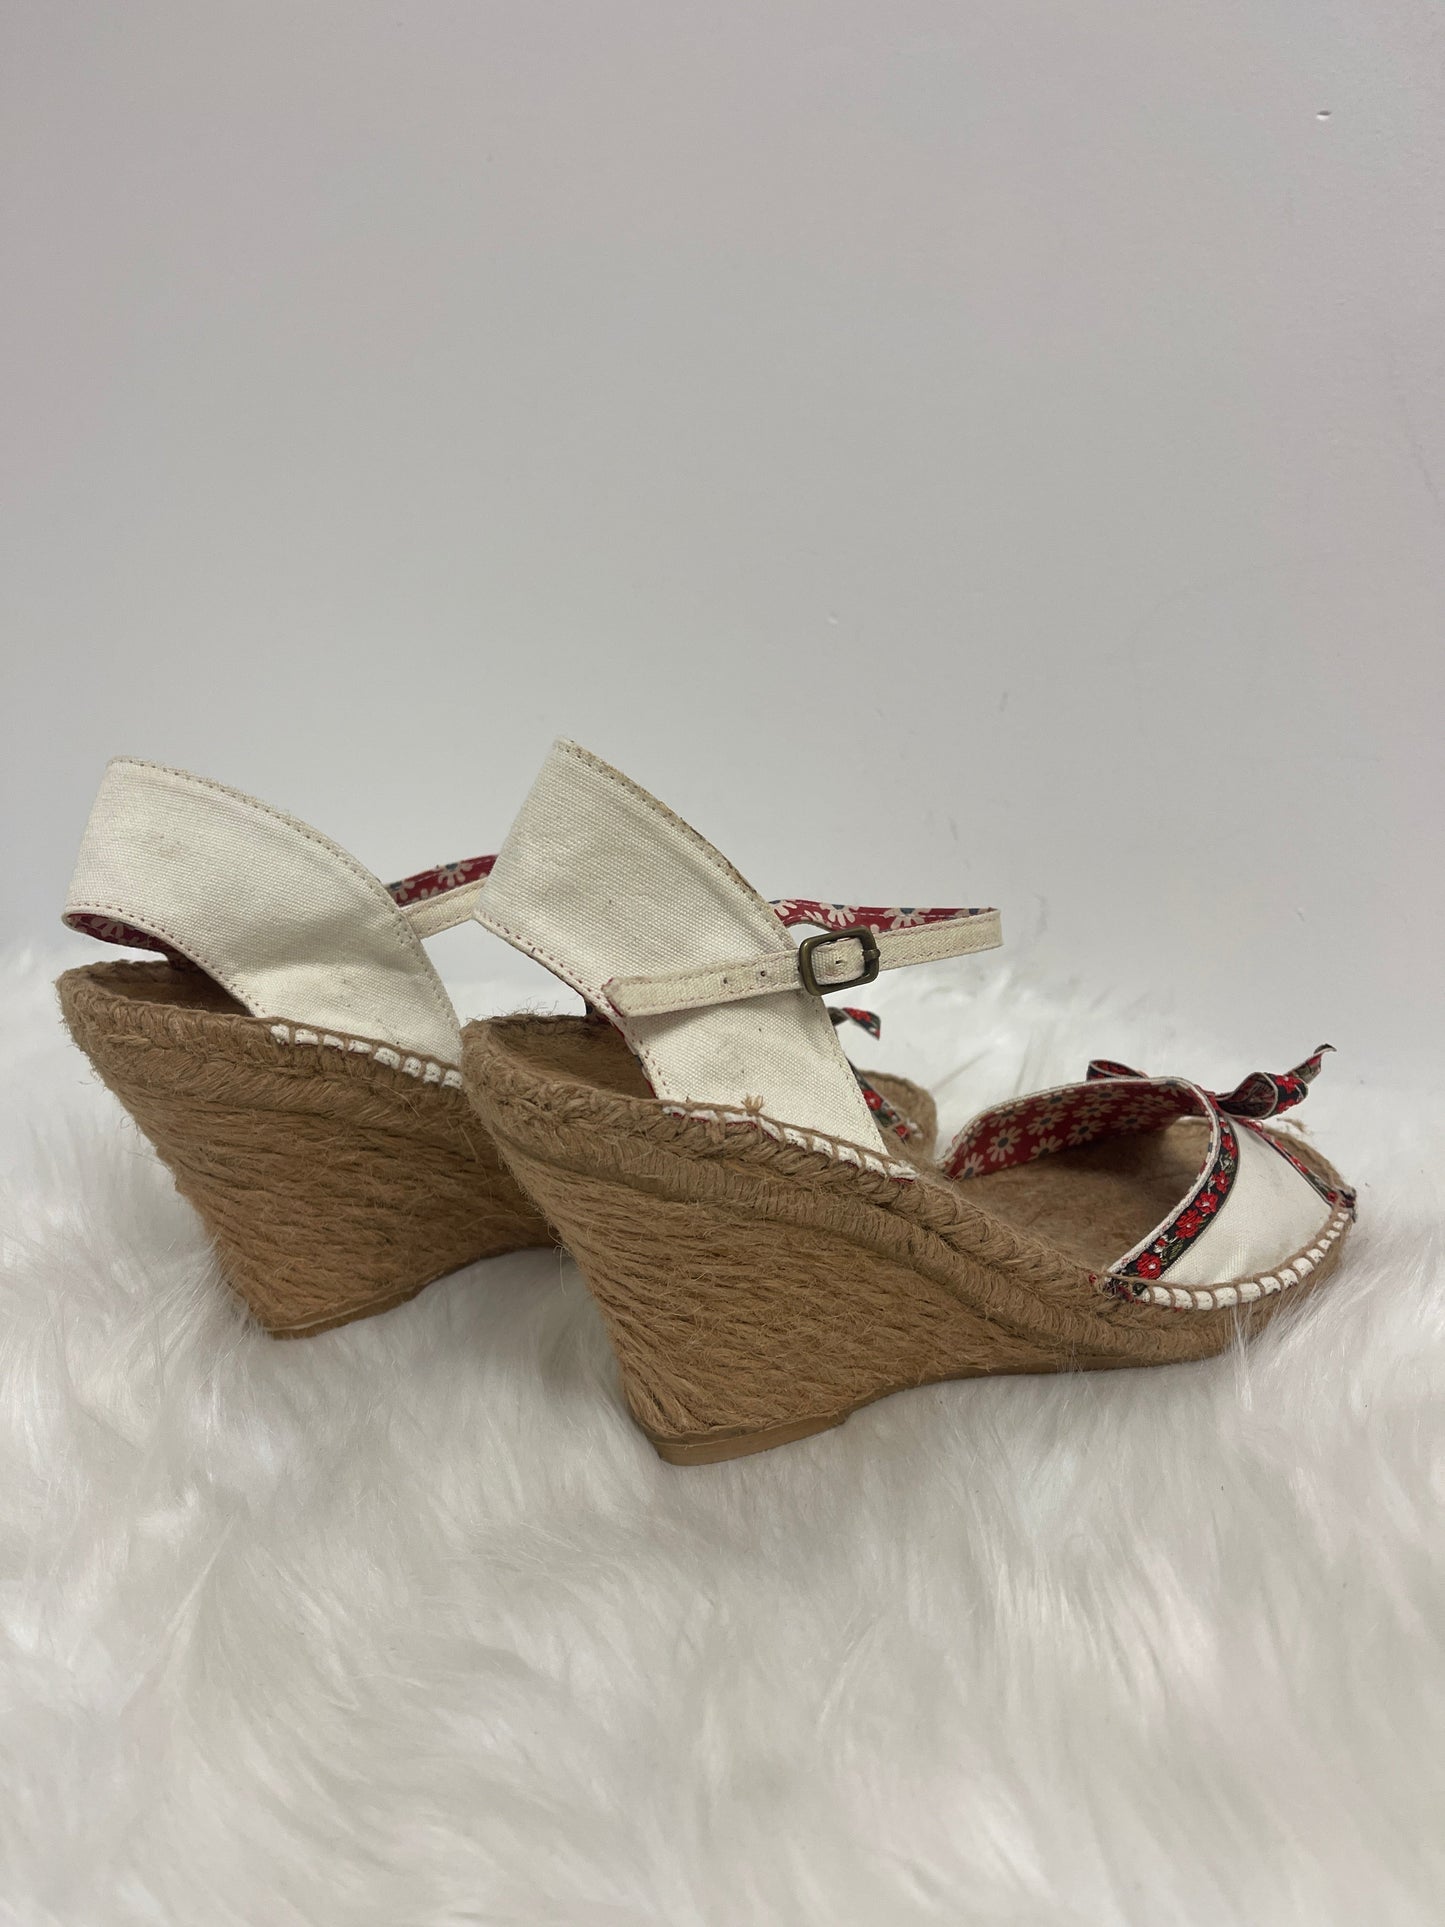 Shoes Heels Wedge By Seychelles  Size: 10